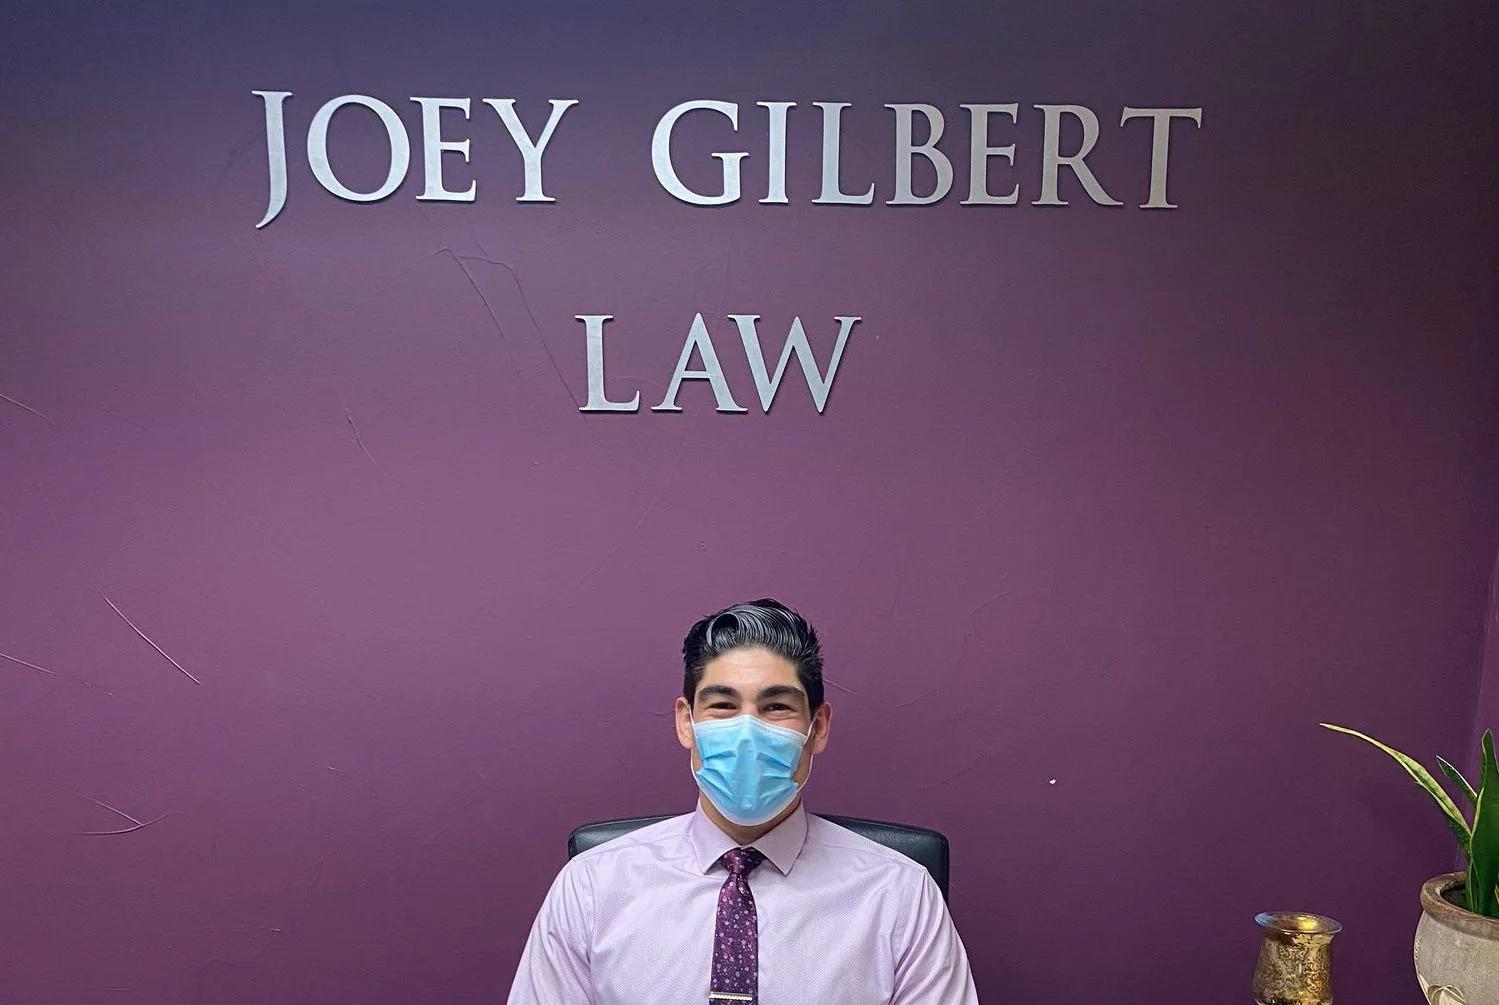 Joey Gilbert ‘had nothing to do with anti-mask rallies;’ pushed masks